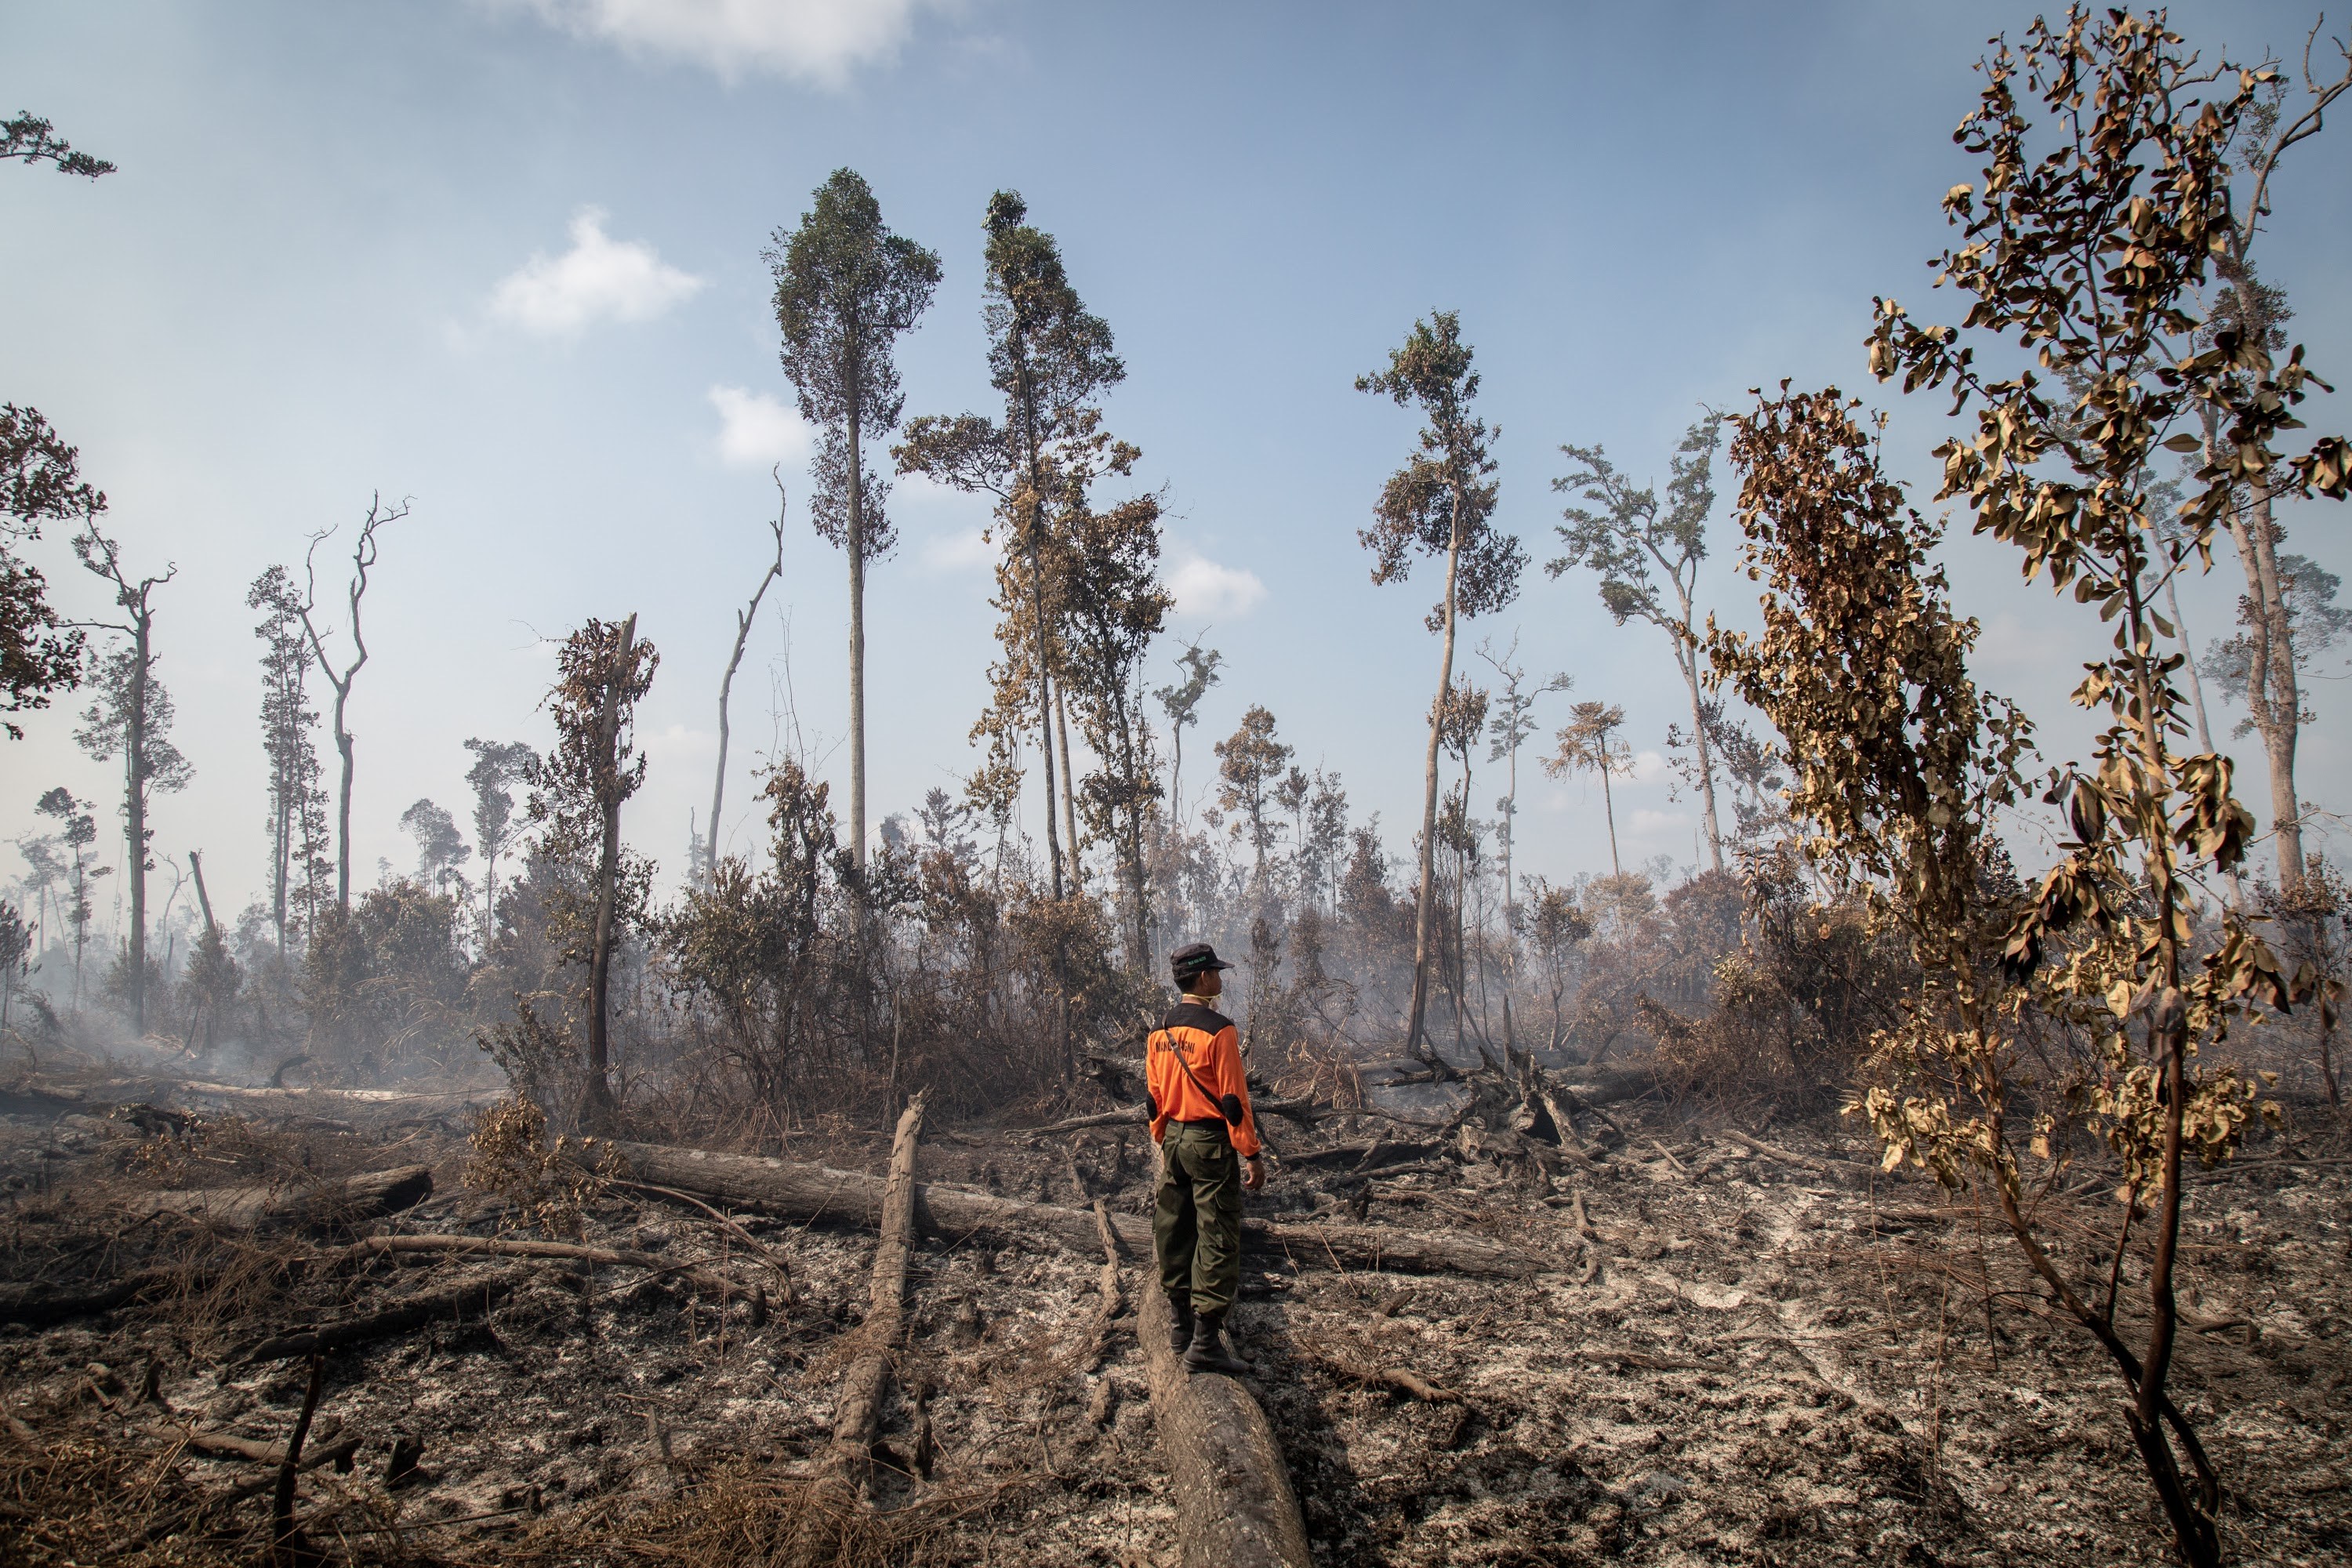 COP26 commitment to end deforestation must hold leaders accountable